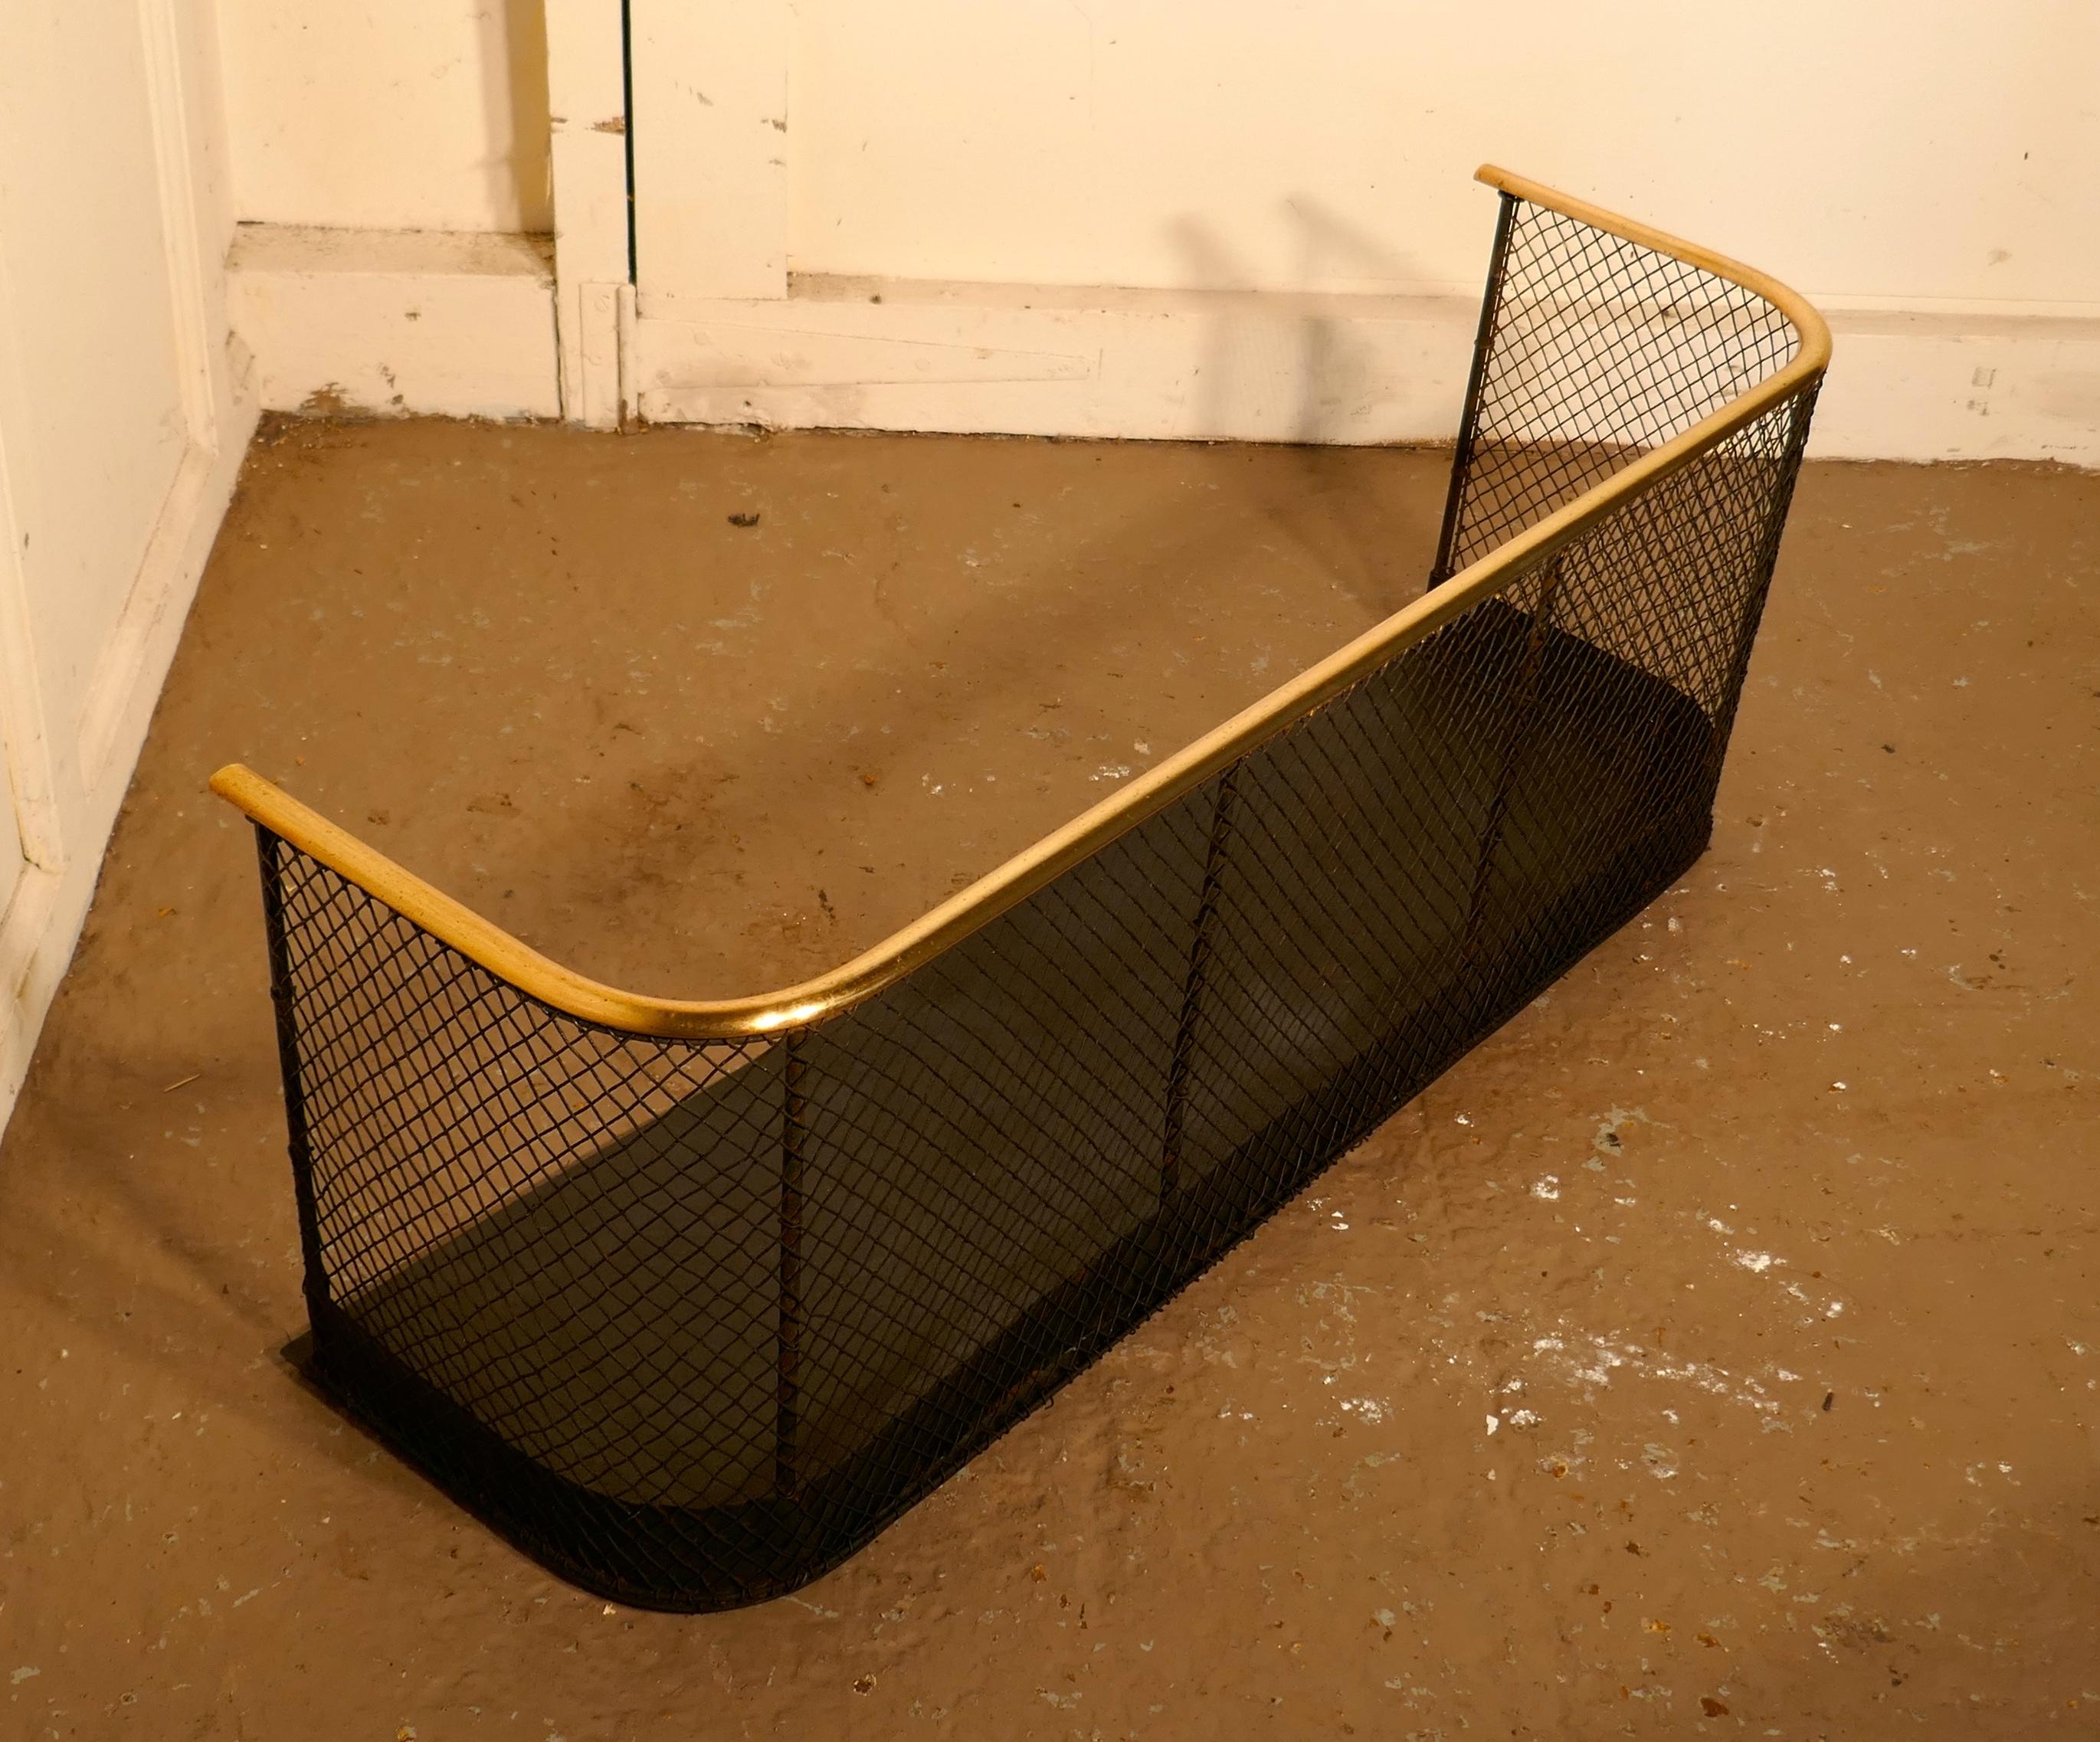 19th century brass and iron club fender.

A 19th century antique fire guard often known as a club fender, the iron guard has a mesh guard with a brass rail at the top
The fender is in good all round condition, and has good patination
Measures: